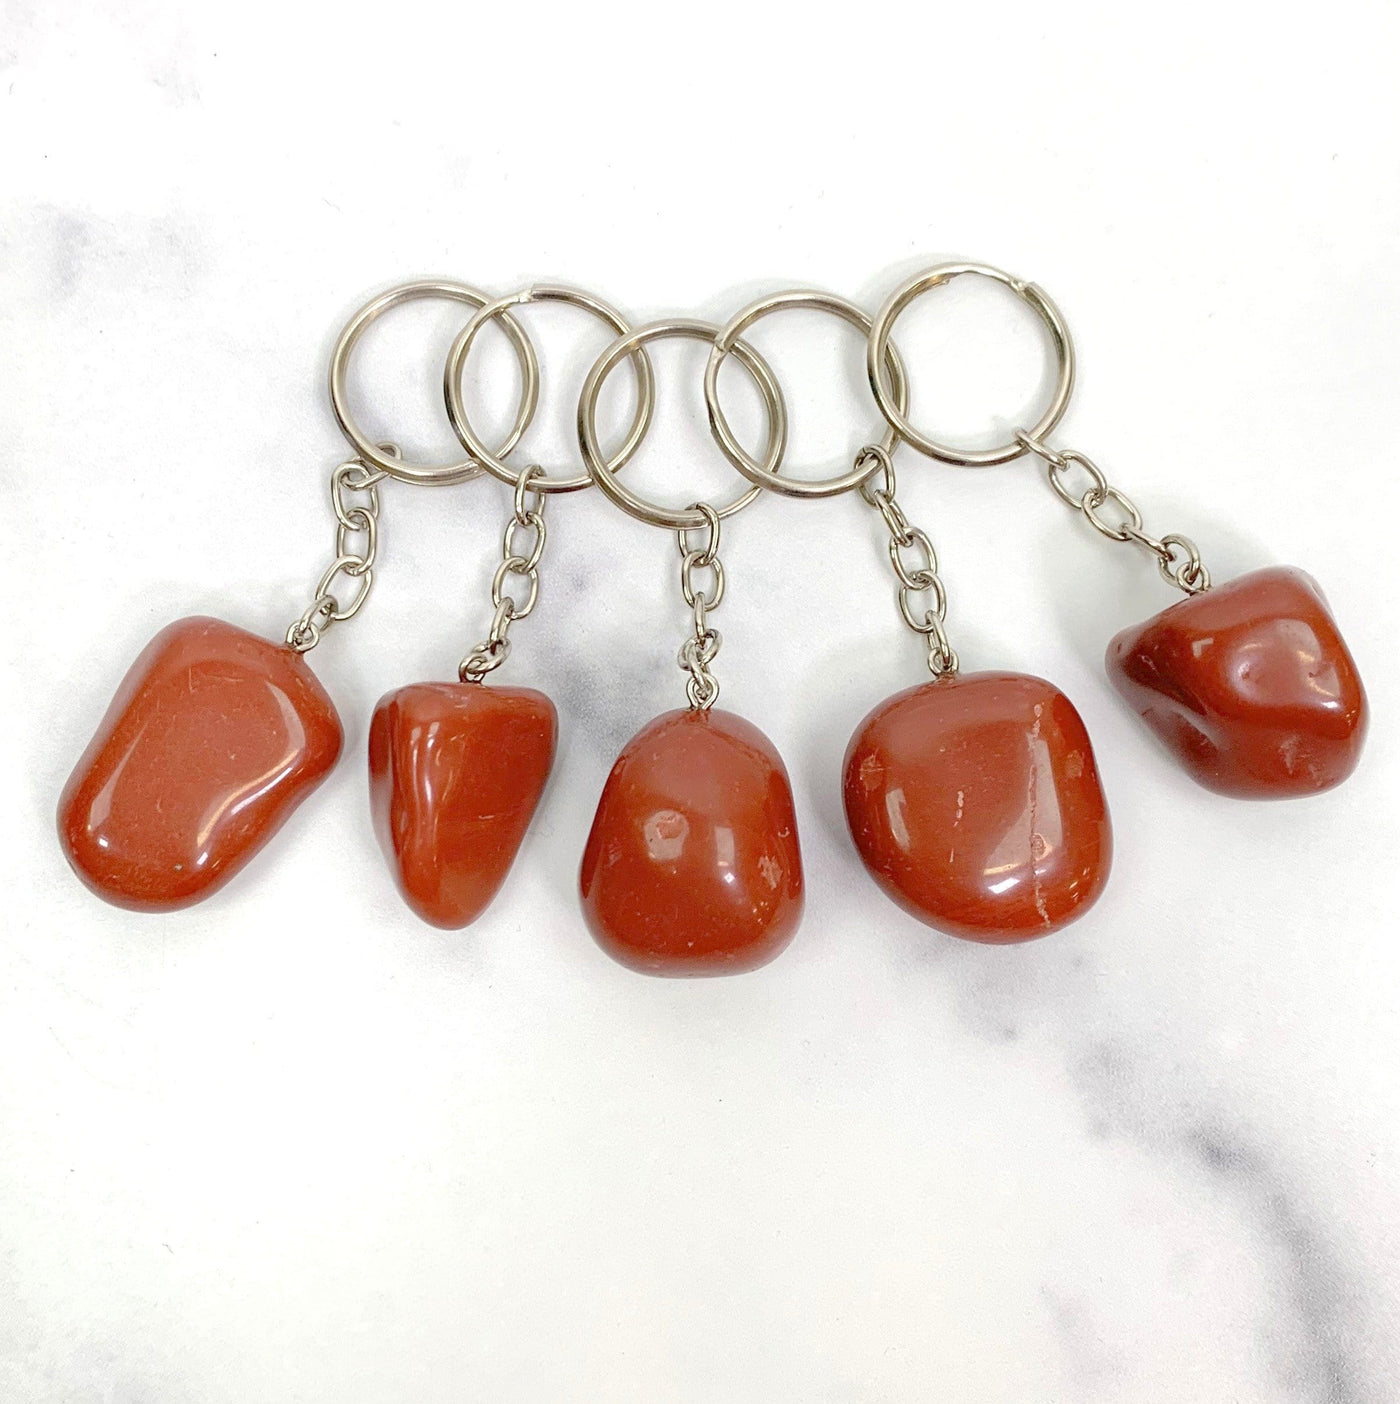 multiple Tumbled Red Jasper silver Keychain links and ring on white background showing various shapes and sizes